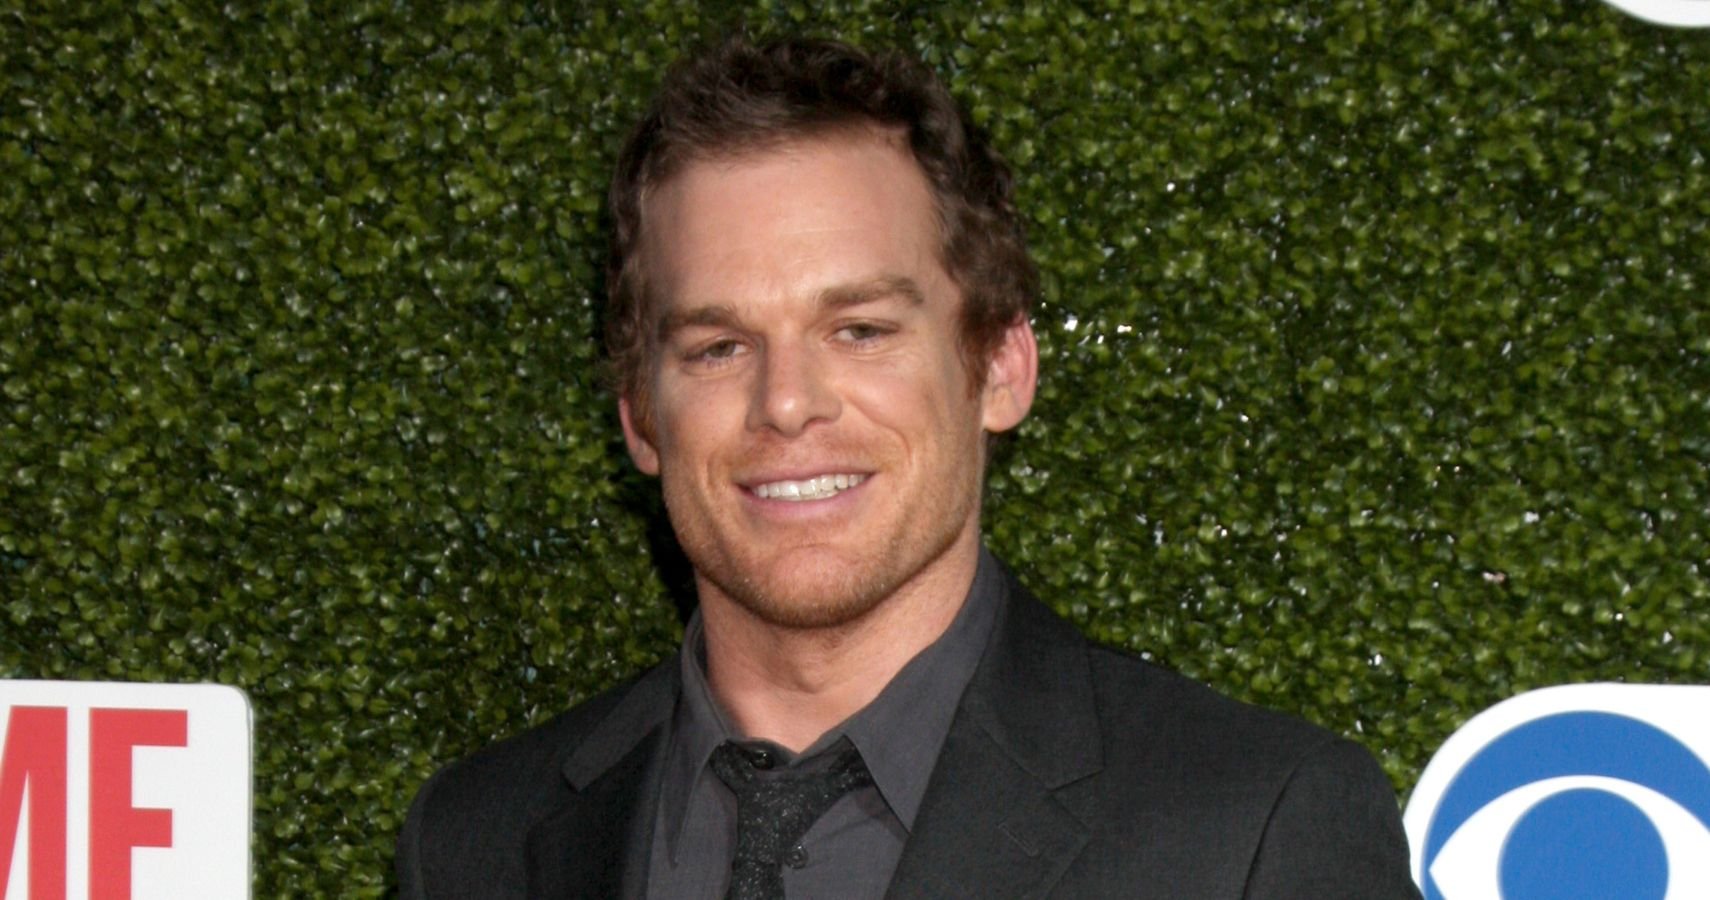 These Are Michael C. Hall's Most Expensive Purchases